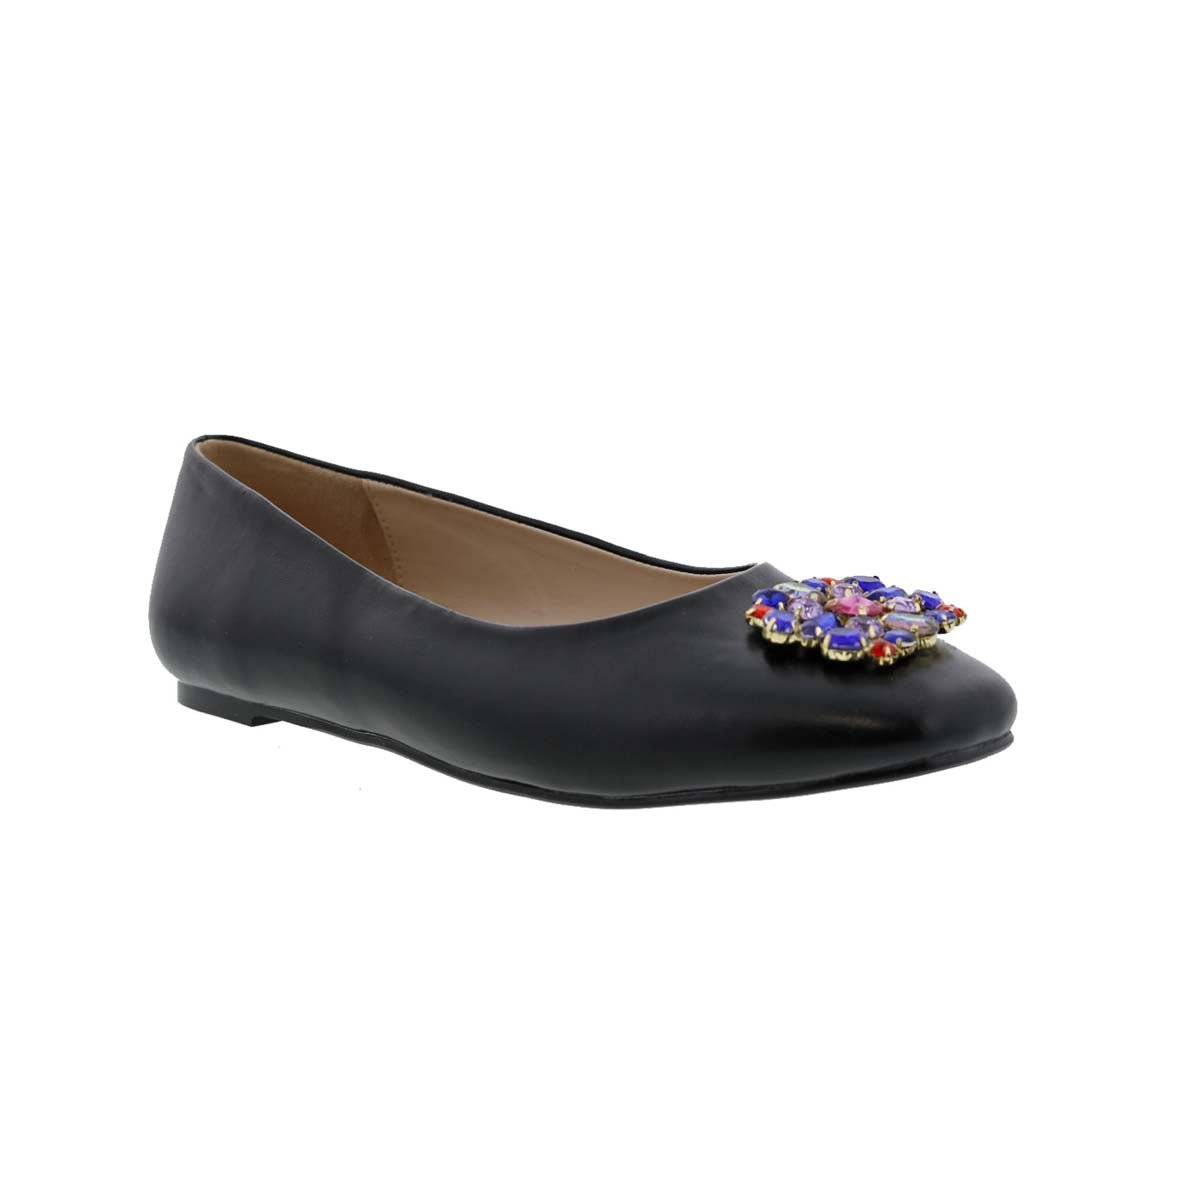 BELLINI SYBIL WOMEN SLIP-ON FLAT SHOES IN BLACK SMOOTH - TLW Shoes